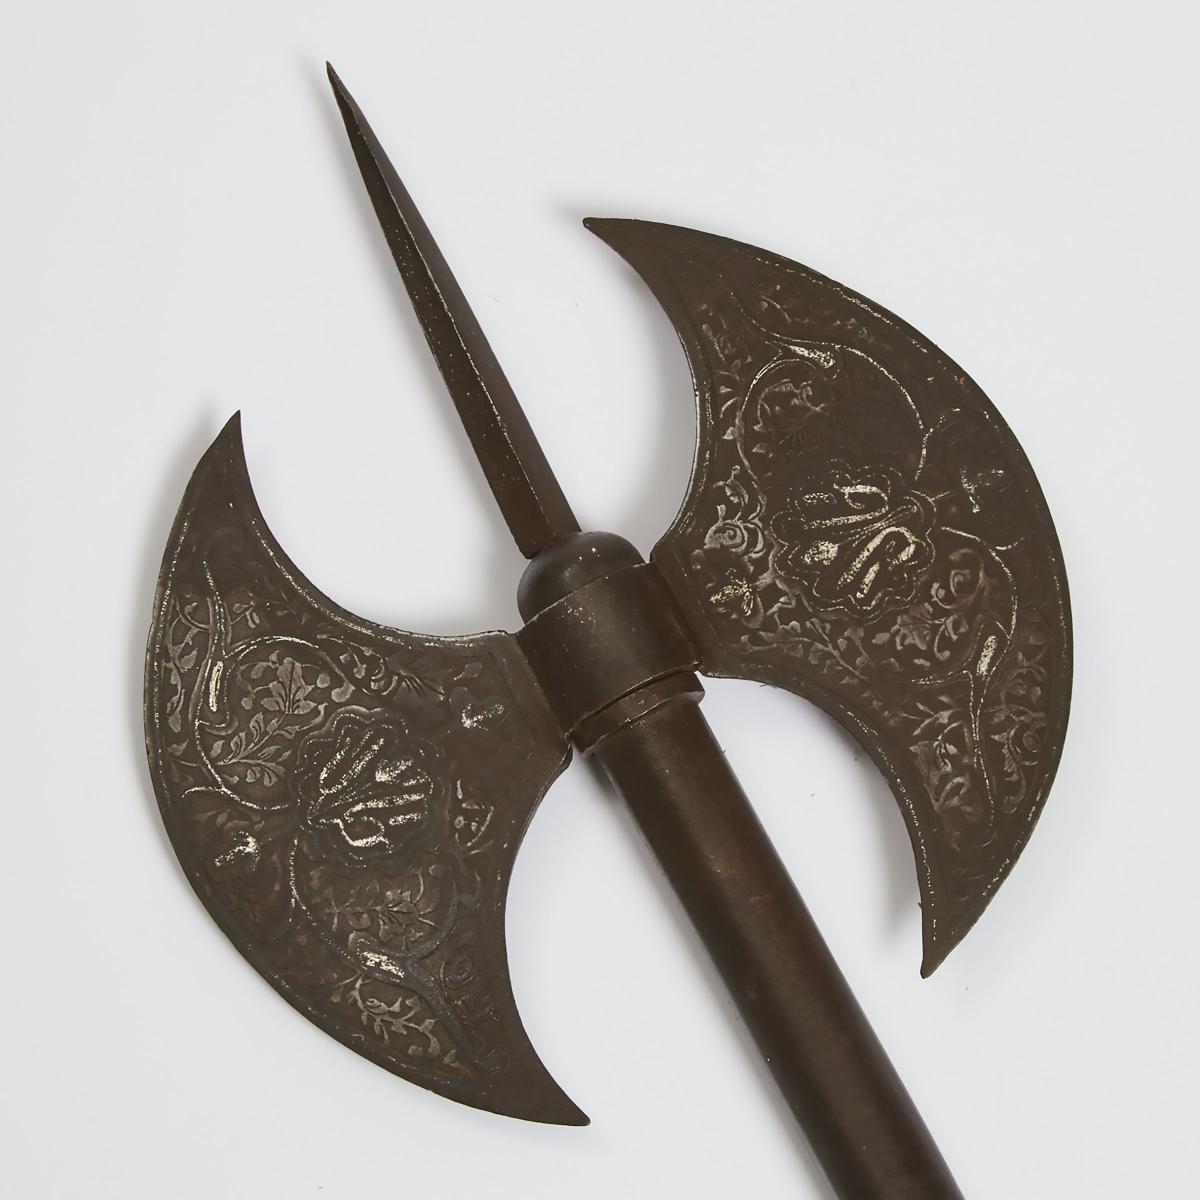 Indo-Persian Silver Damascened Double Headed Processional Tabar (Battle Axe), 19th century - Image 2 of 3